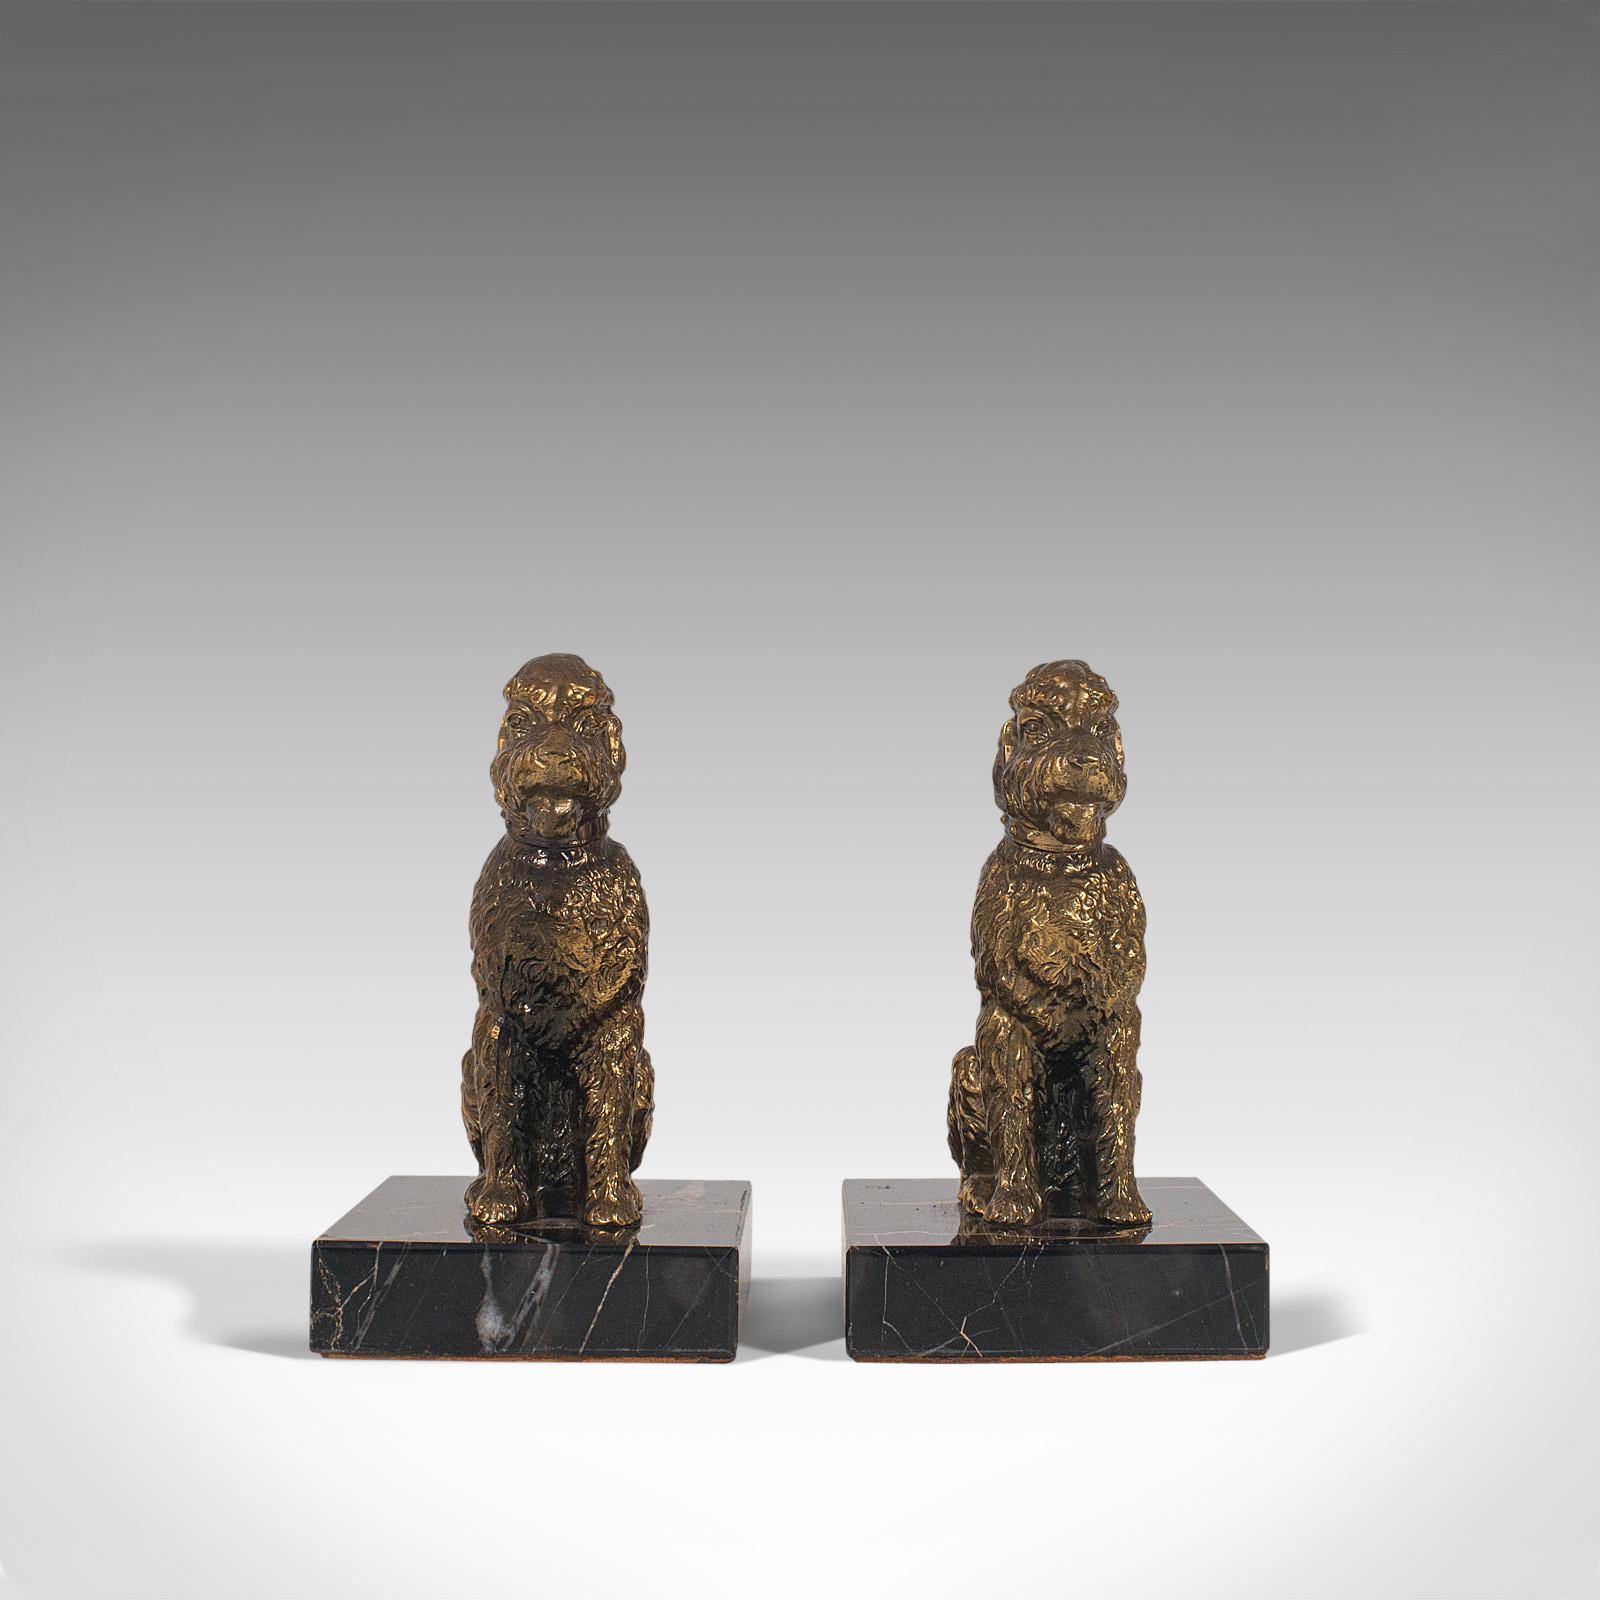 This is a pair of vintage dog figures. An English, gilt metal study of the loveable Airedale Terrier upon a marble base, dating to the late 20th century, circa 1980.

Faithful friends cast in decorative form
Displaying a desirable aged patina,